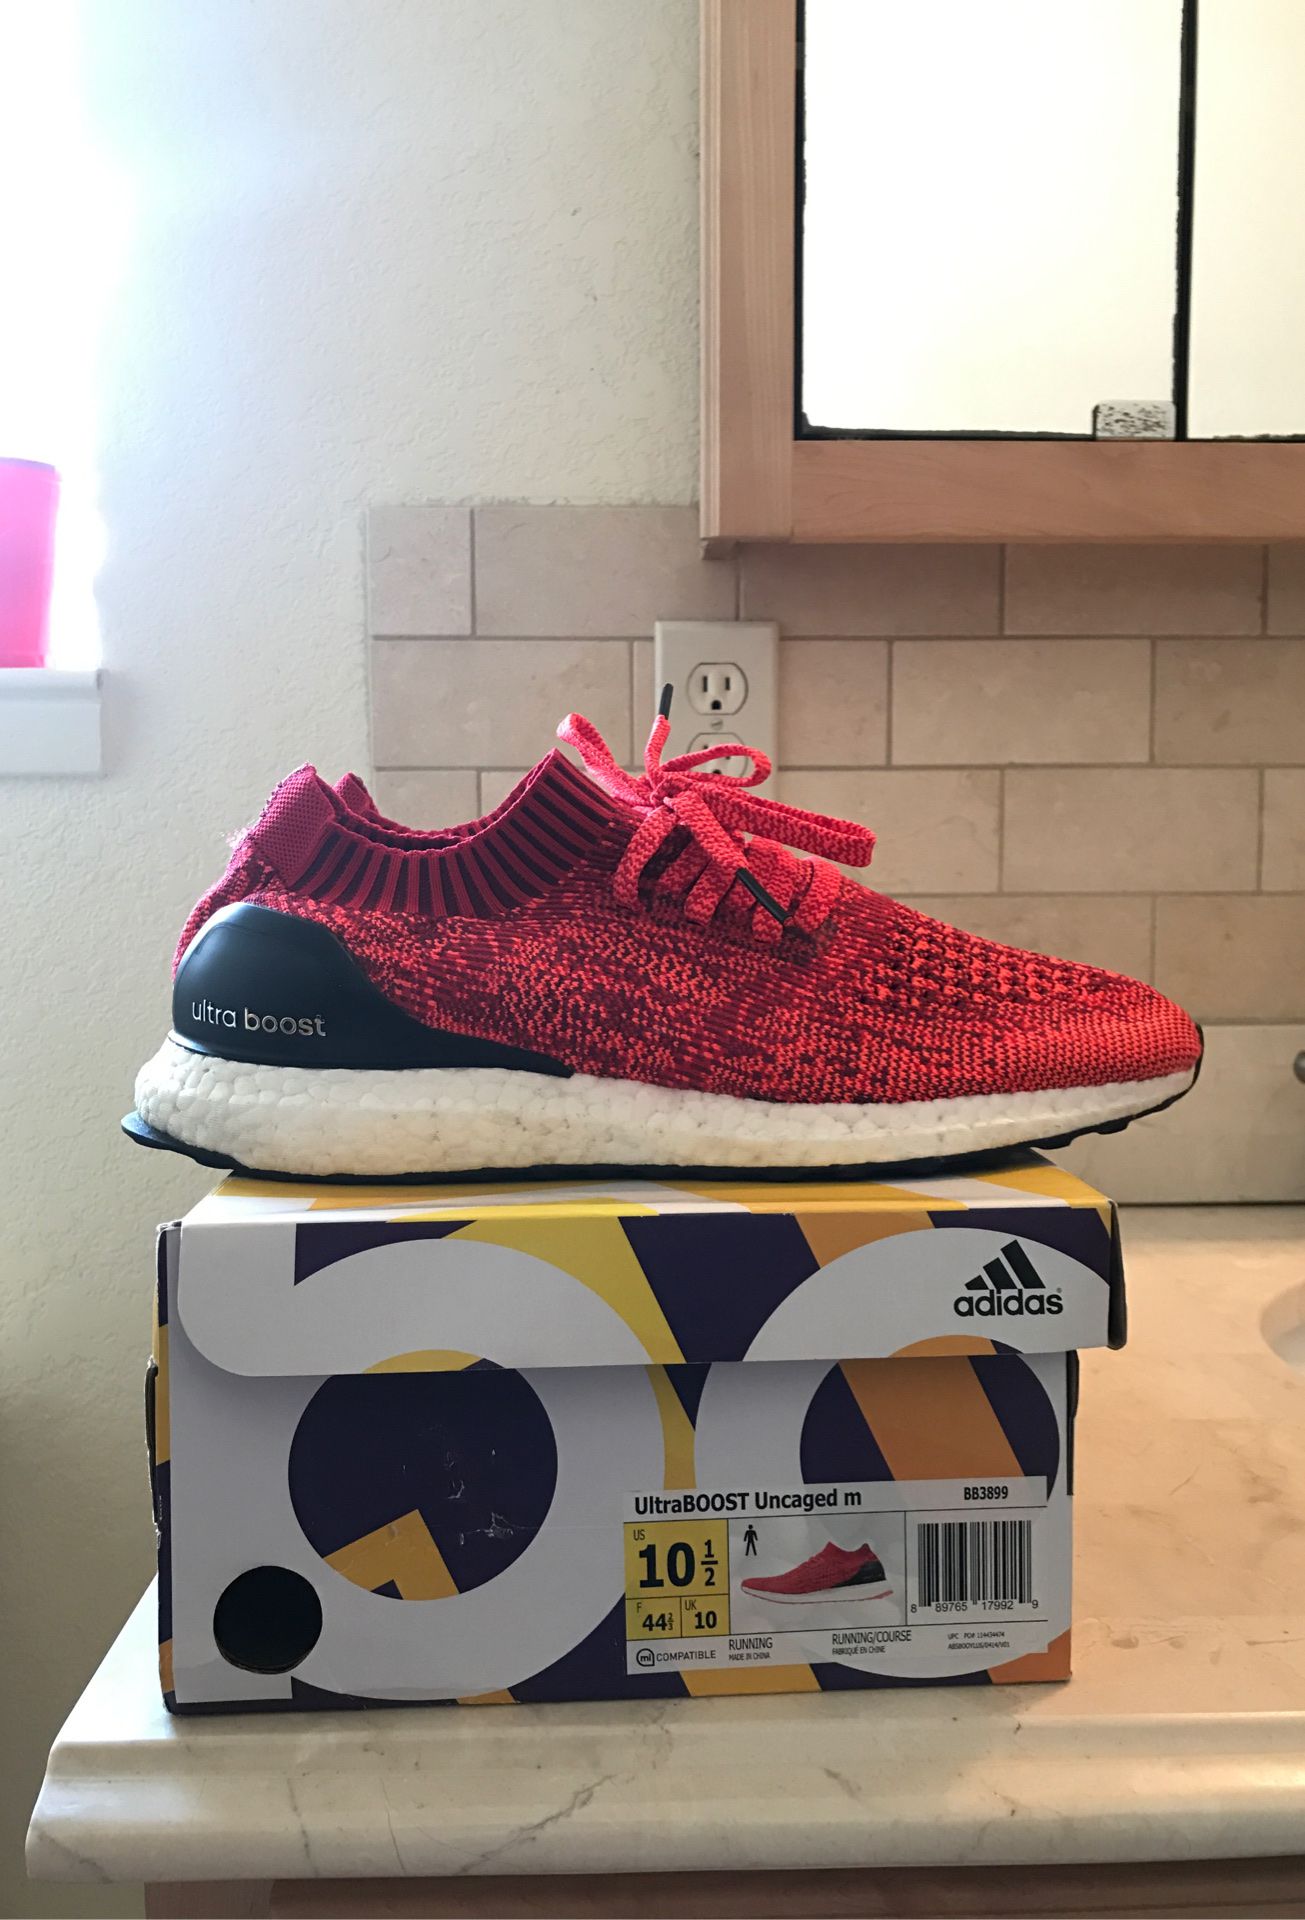 Adidas Ultra boost uncaged